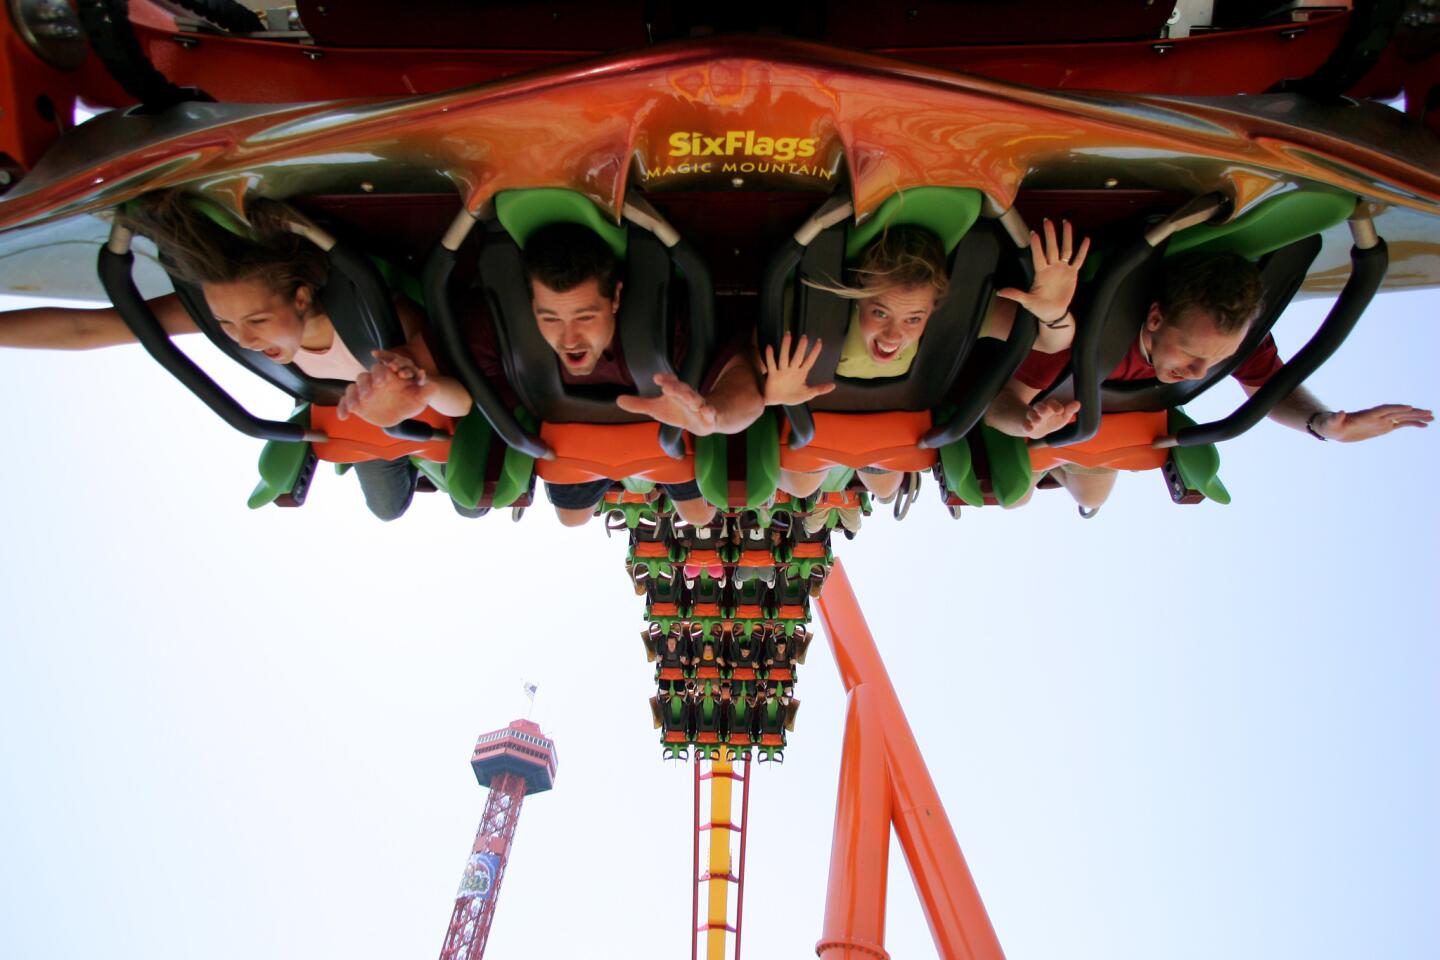 Tatsu in Valencia, Calif., is the fastest, tallest and longest flying roller coaster in the world. A flying coaster suspends riders in a prone position to simulate the sensation of flight.